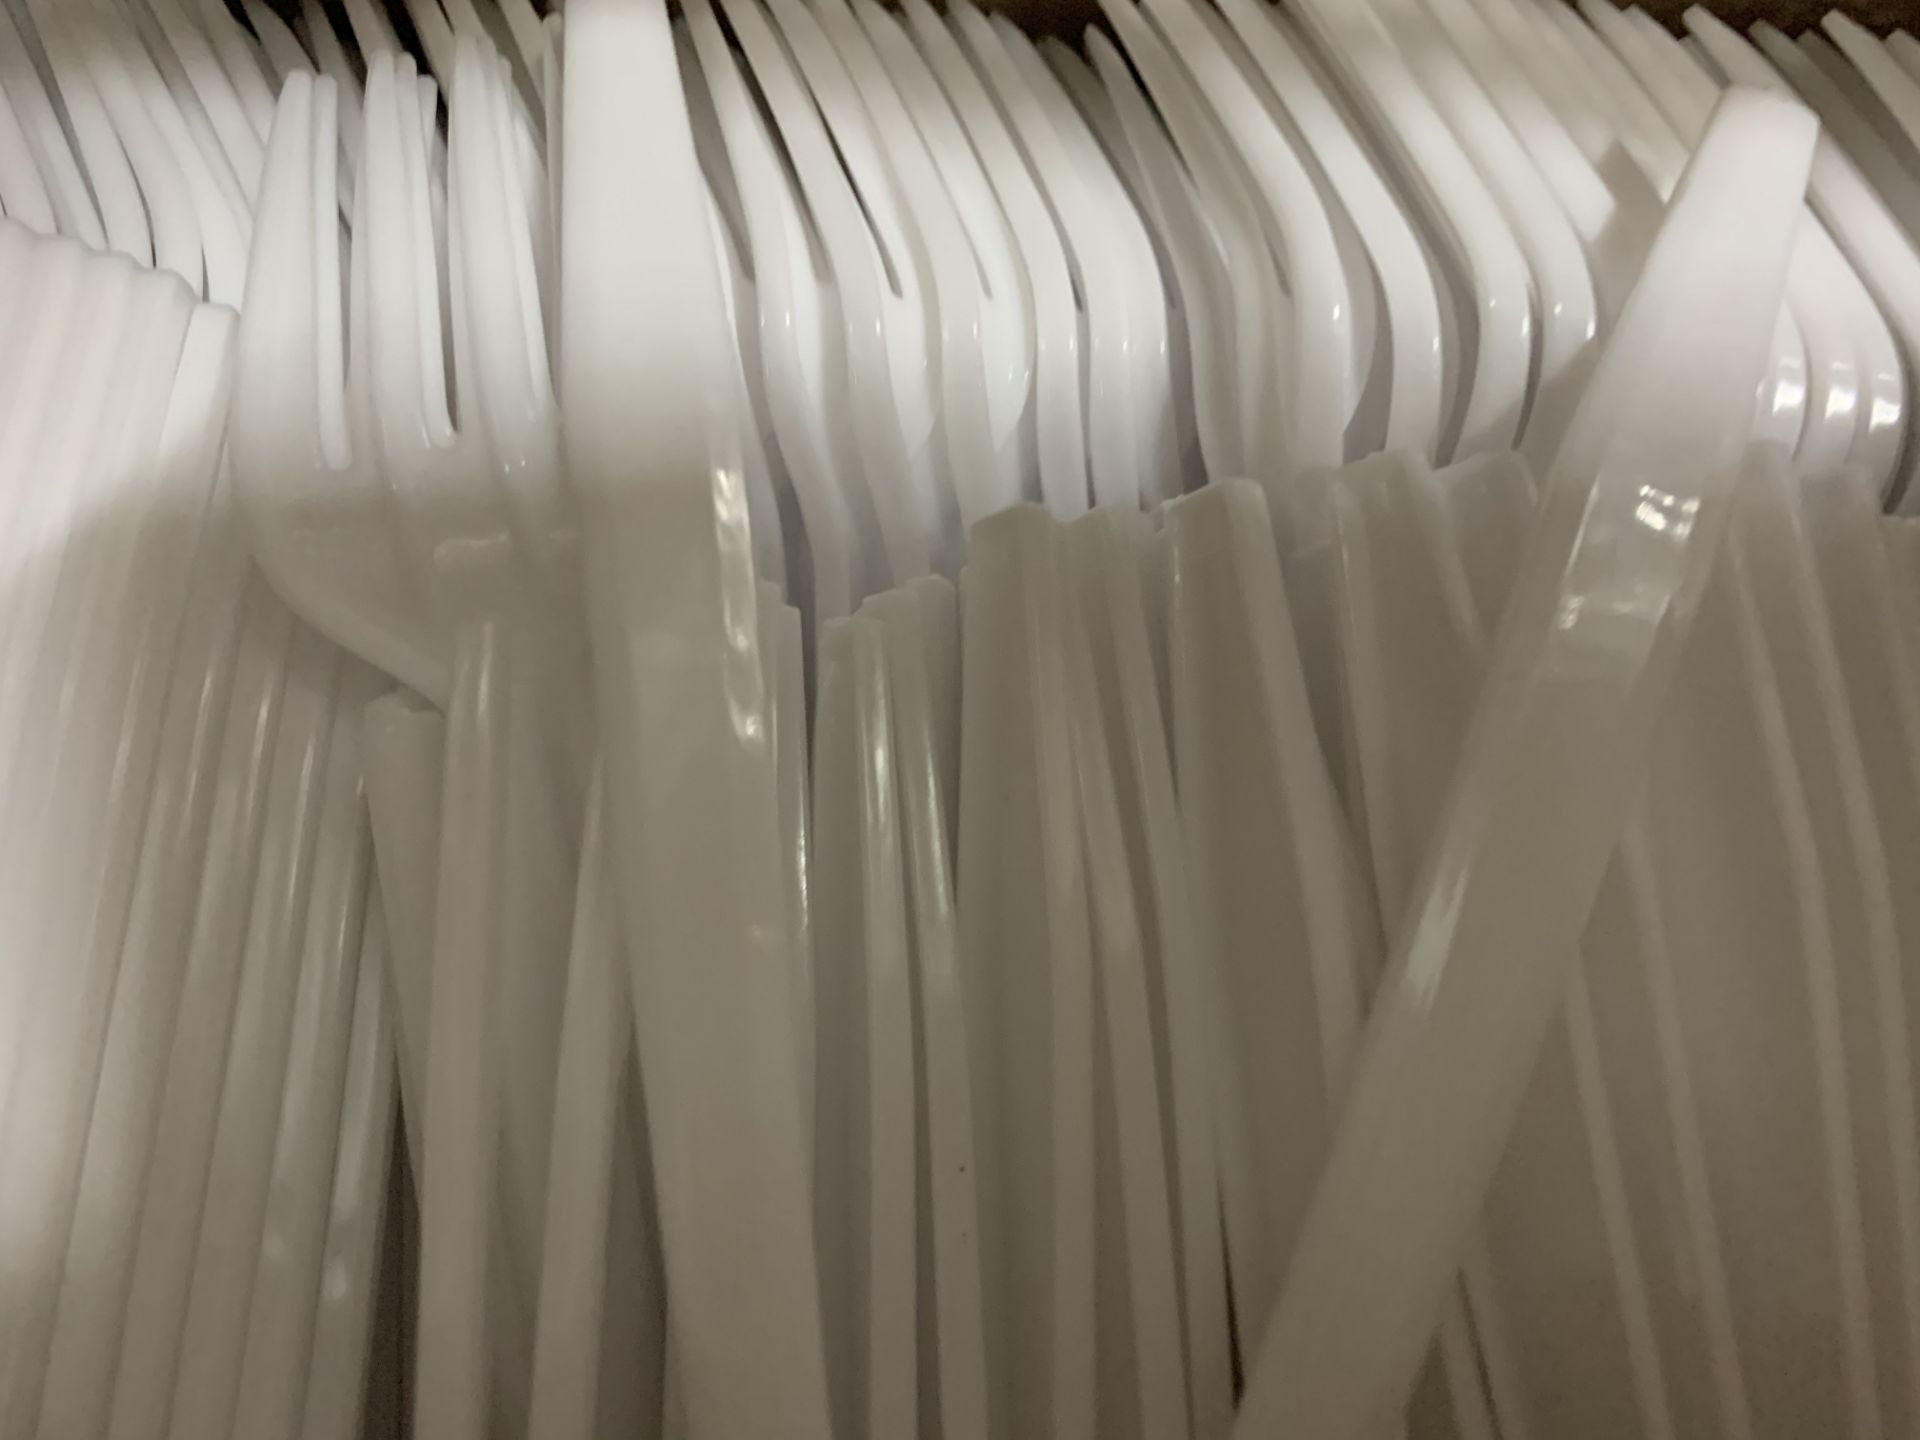 1 x Box of 1000 Mini Forks by 888 Gastro Disposables - Image 4 of 5